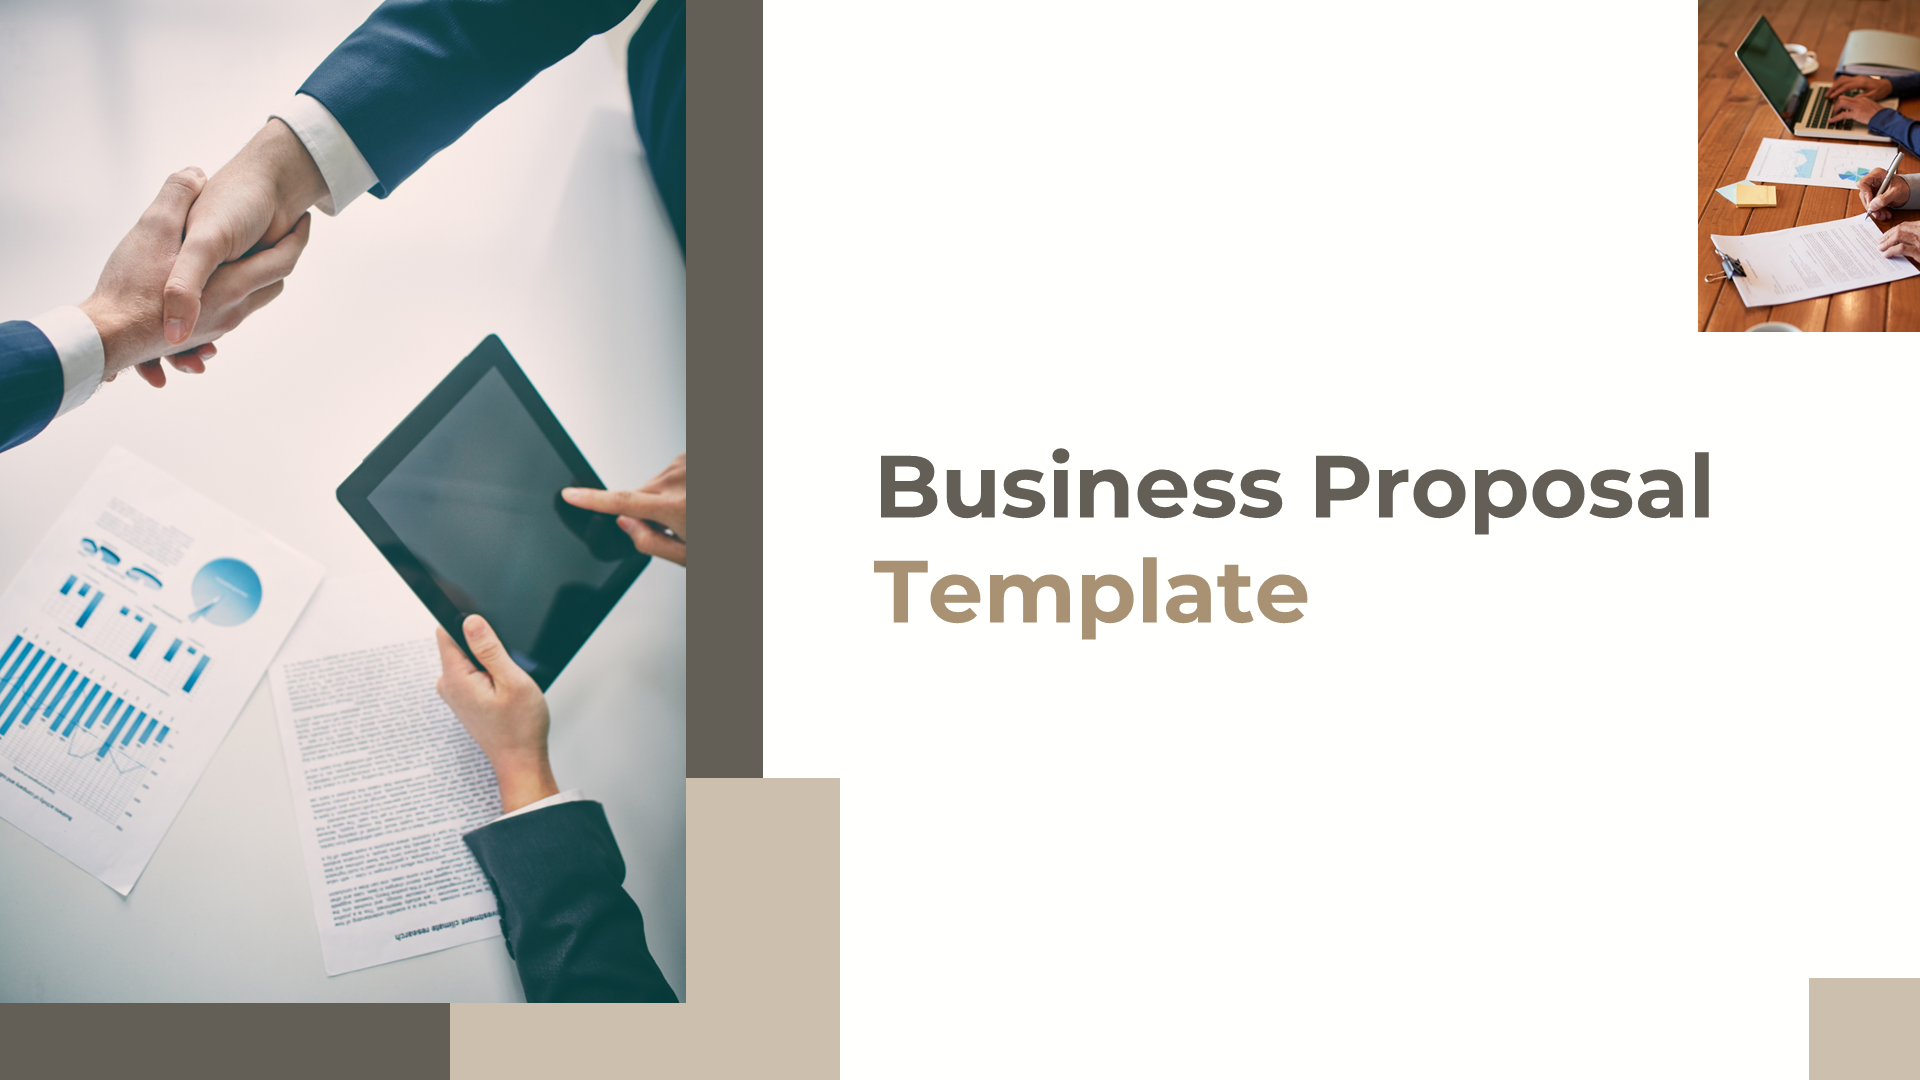 Business Proposal Template PowerPoint Presentation